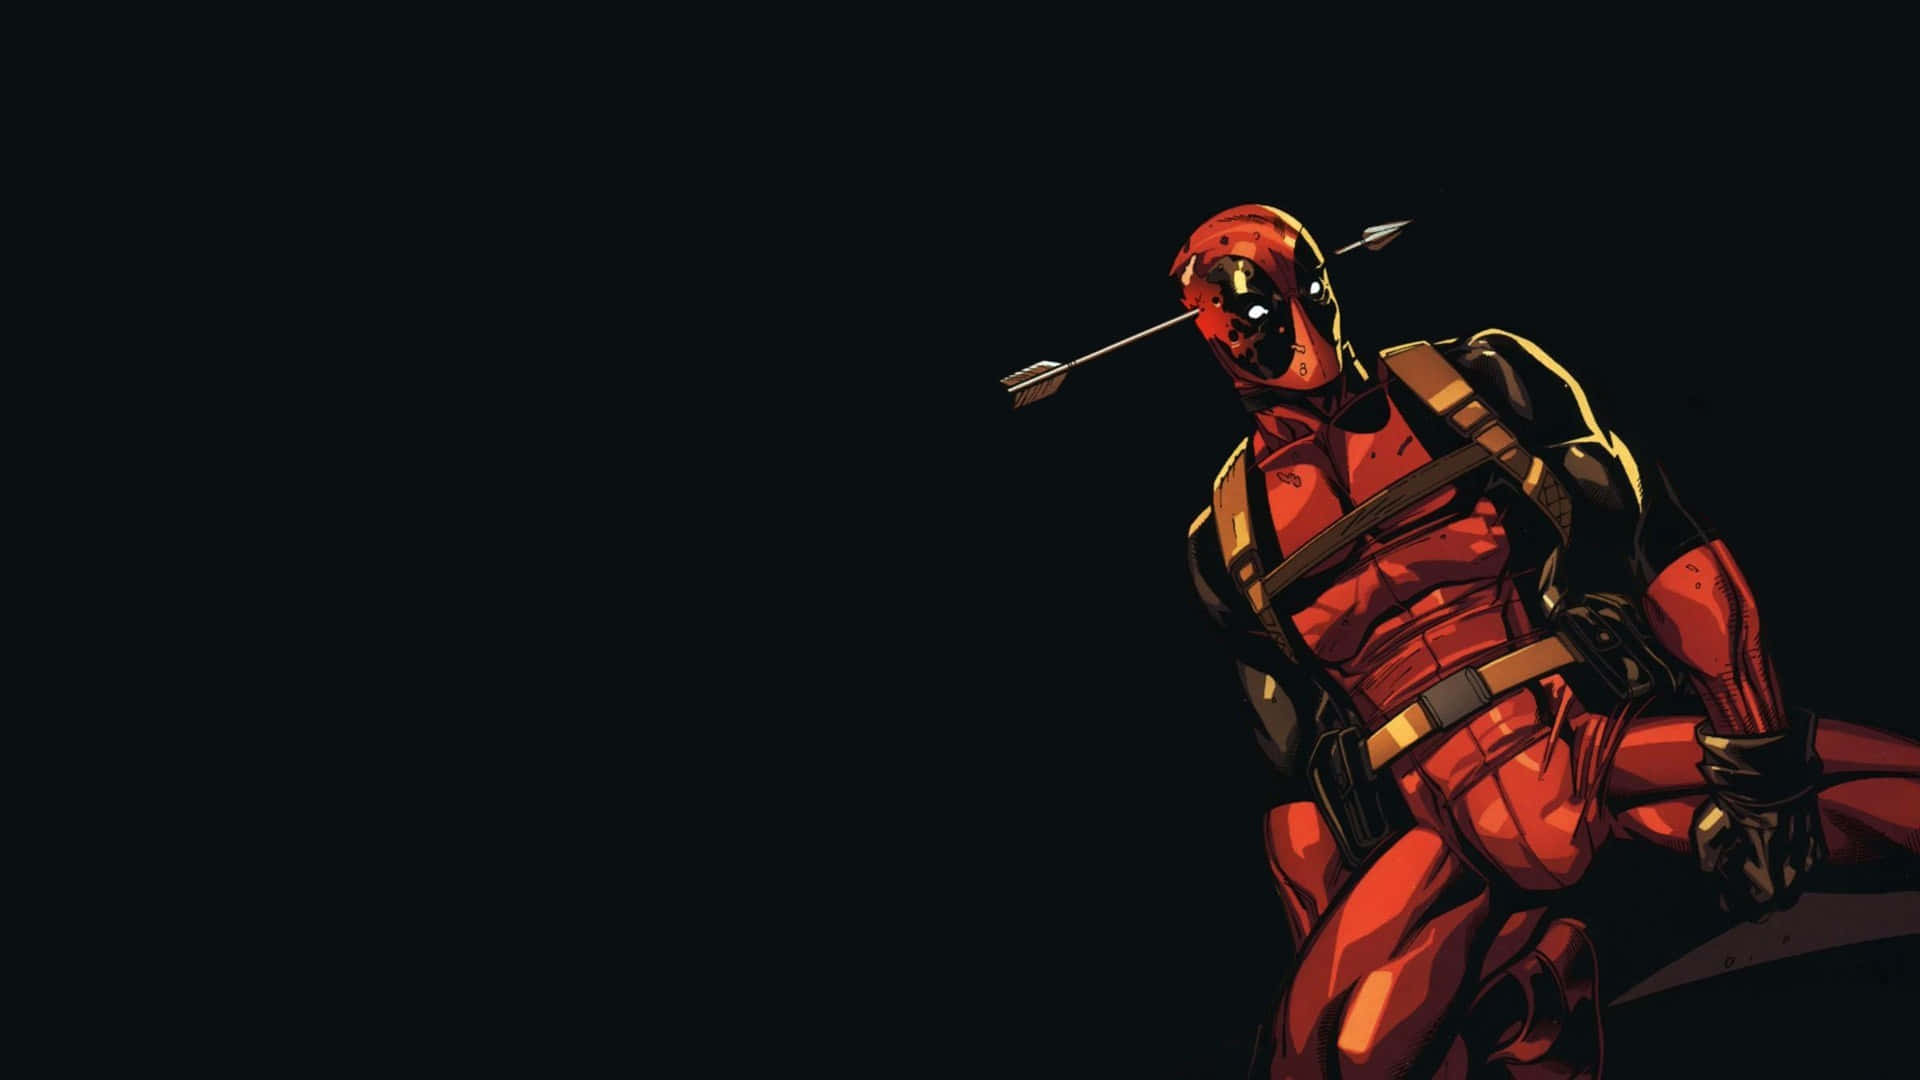 "Bringin’ all the swagger of the regular Deadpool, but in black!" Wallpaper